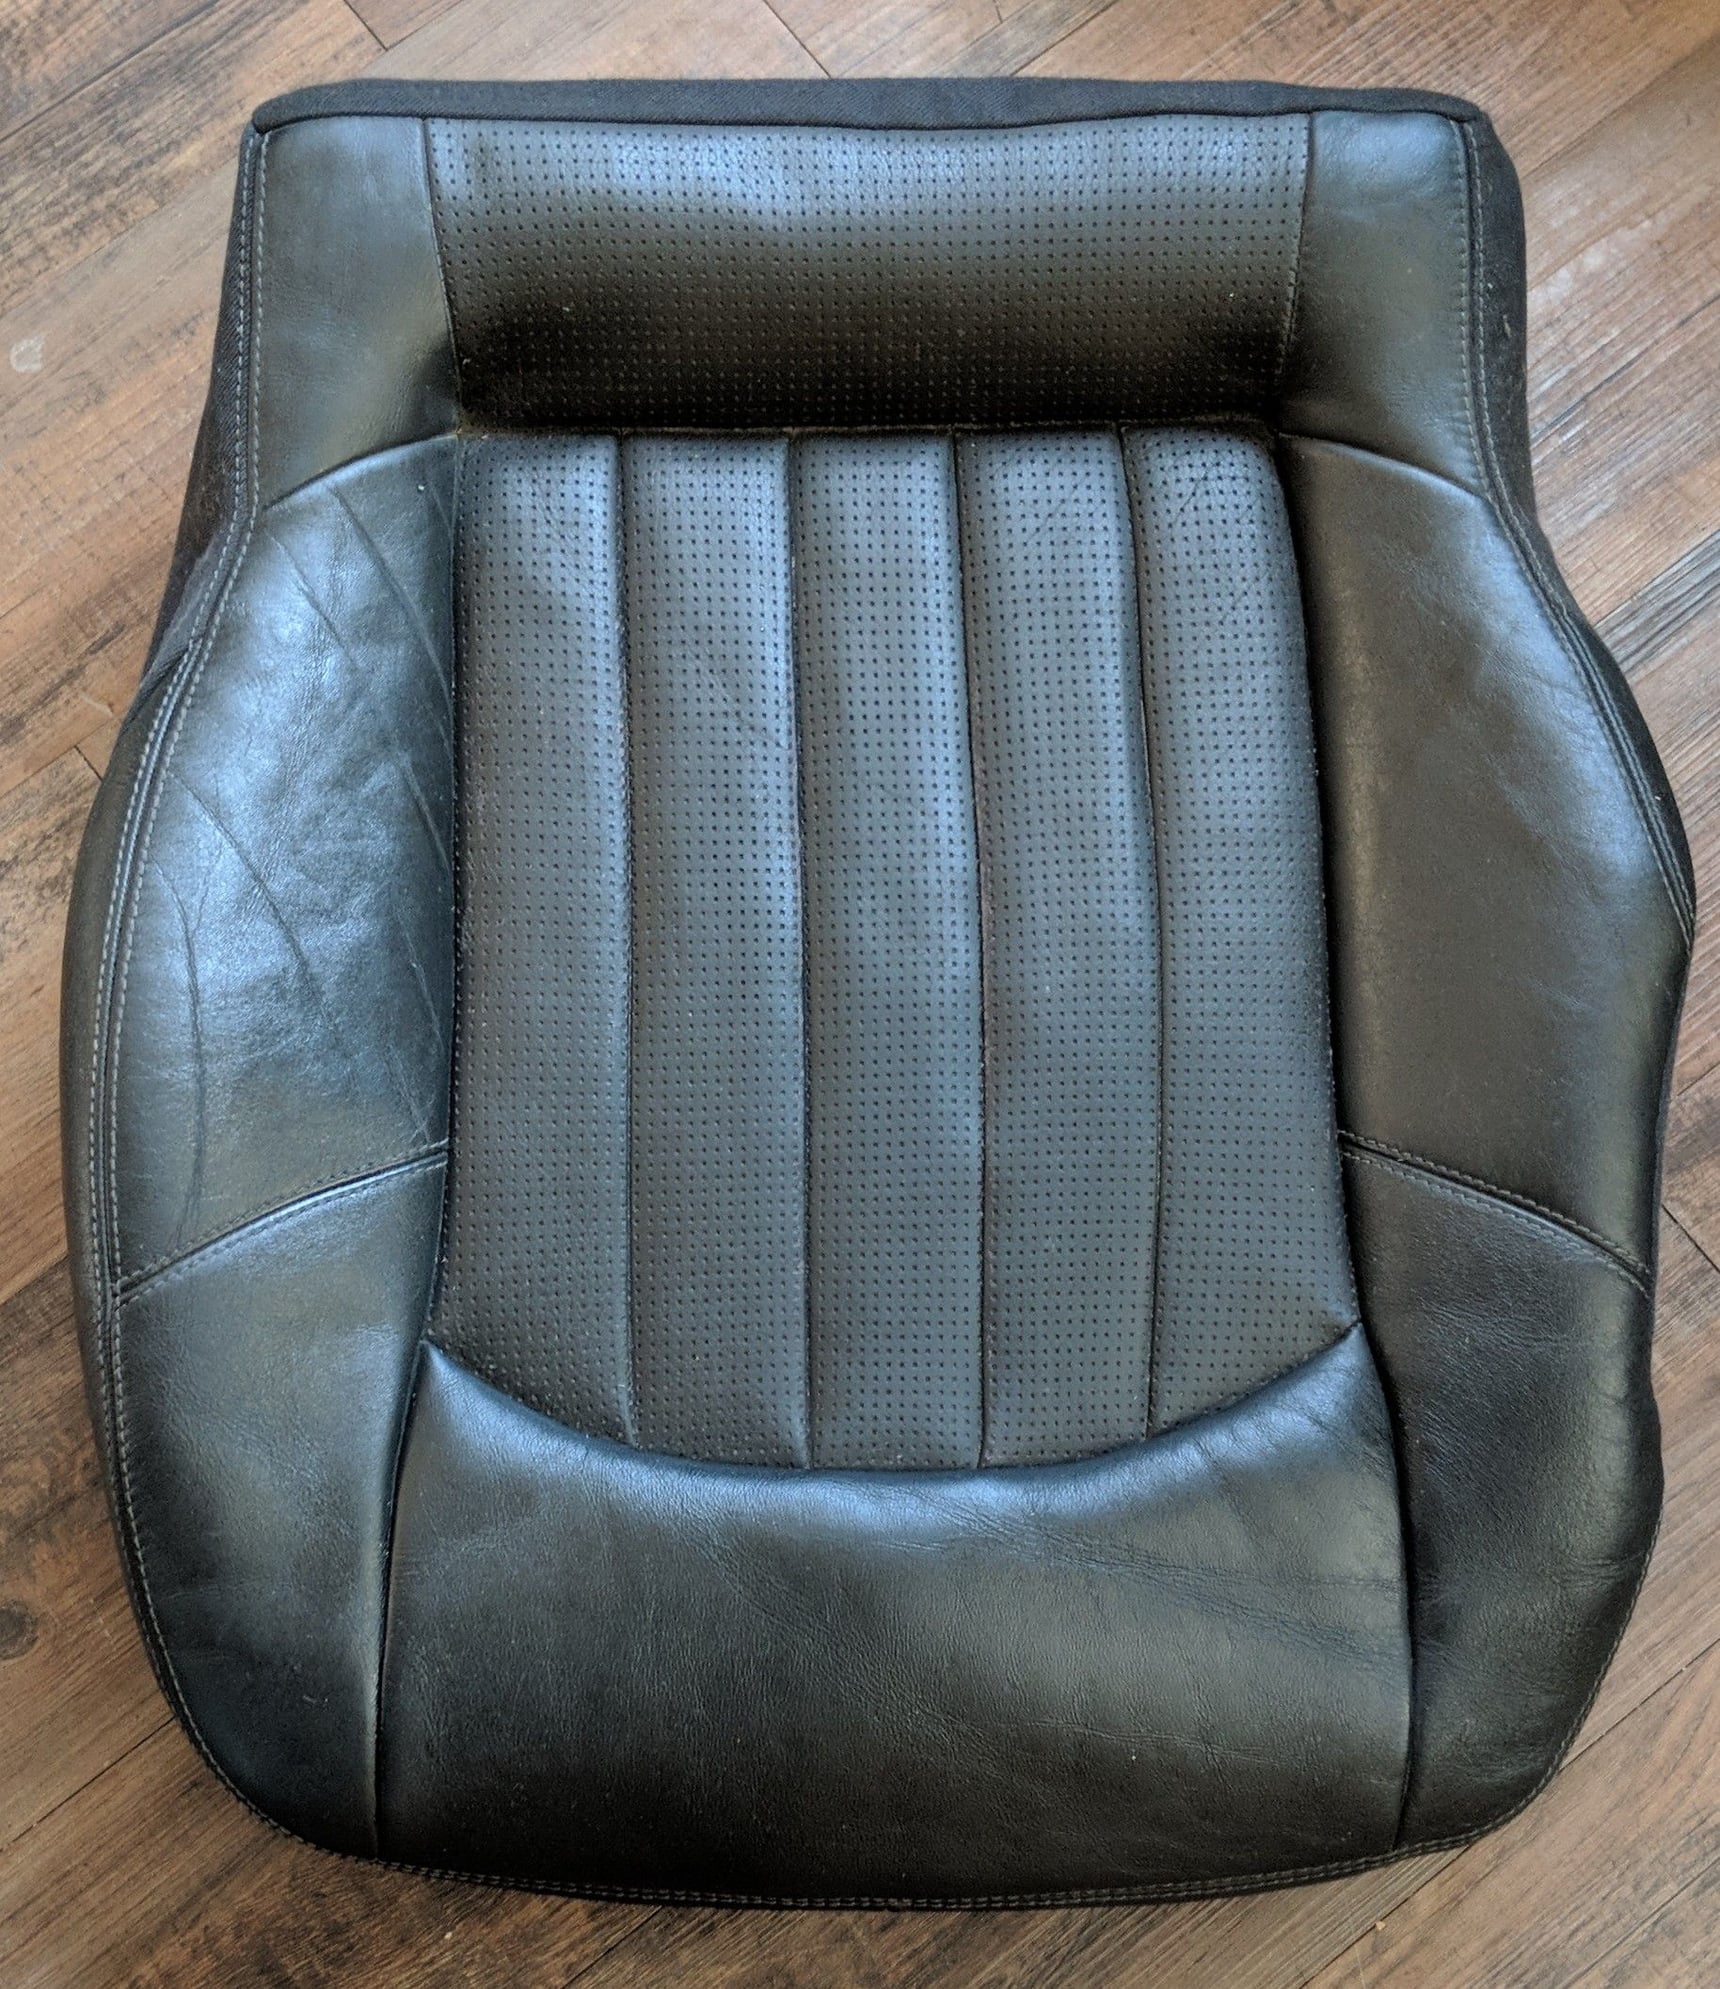 Interior/Upholstery - 03/04 CLK55AMG Passenger lower seat cover Black - Used - 2003 to 2004 Mercedes-Benz CLK55 AMG - chicago, IL 60642, United States